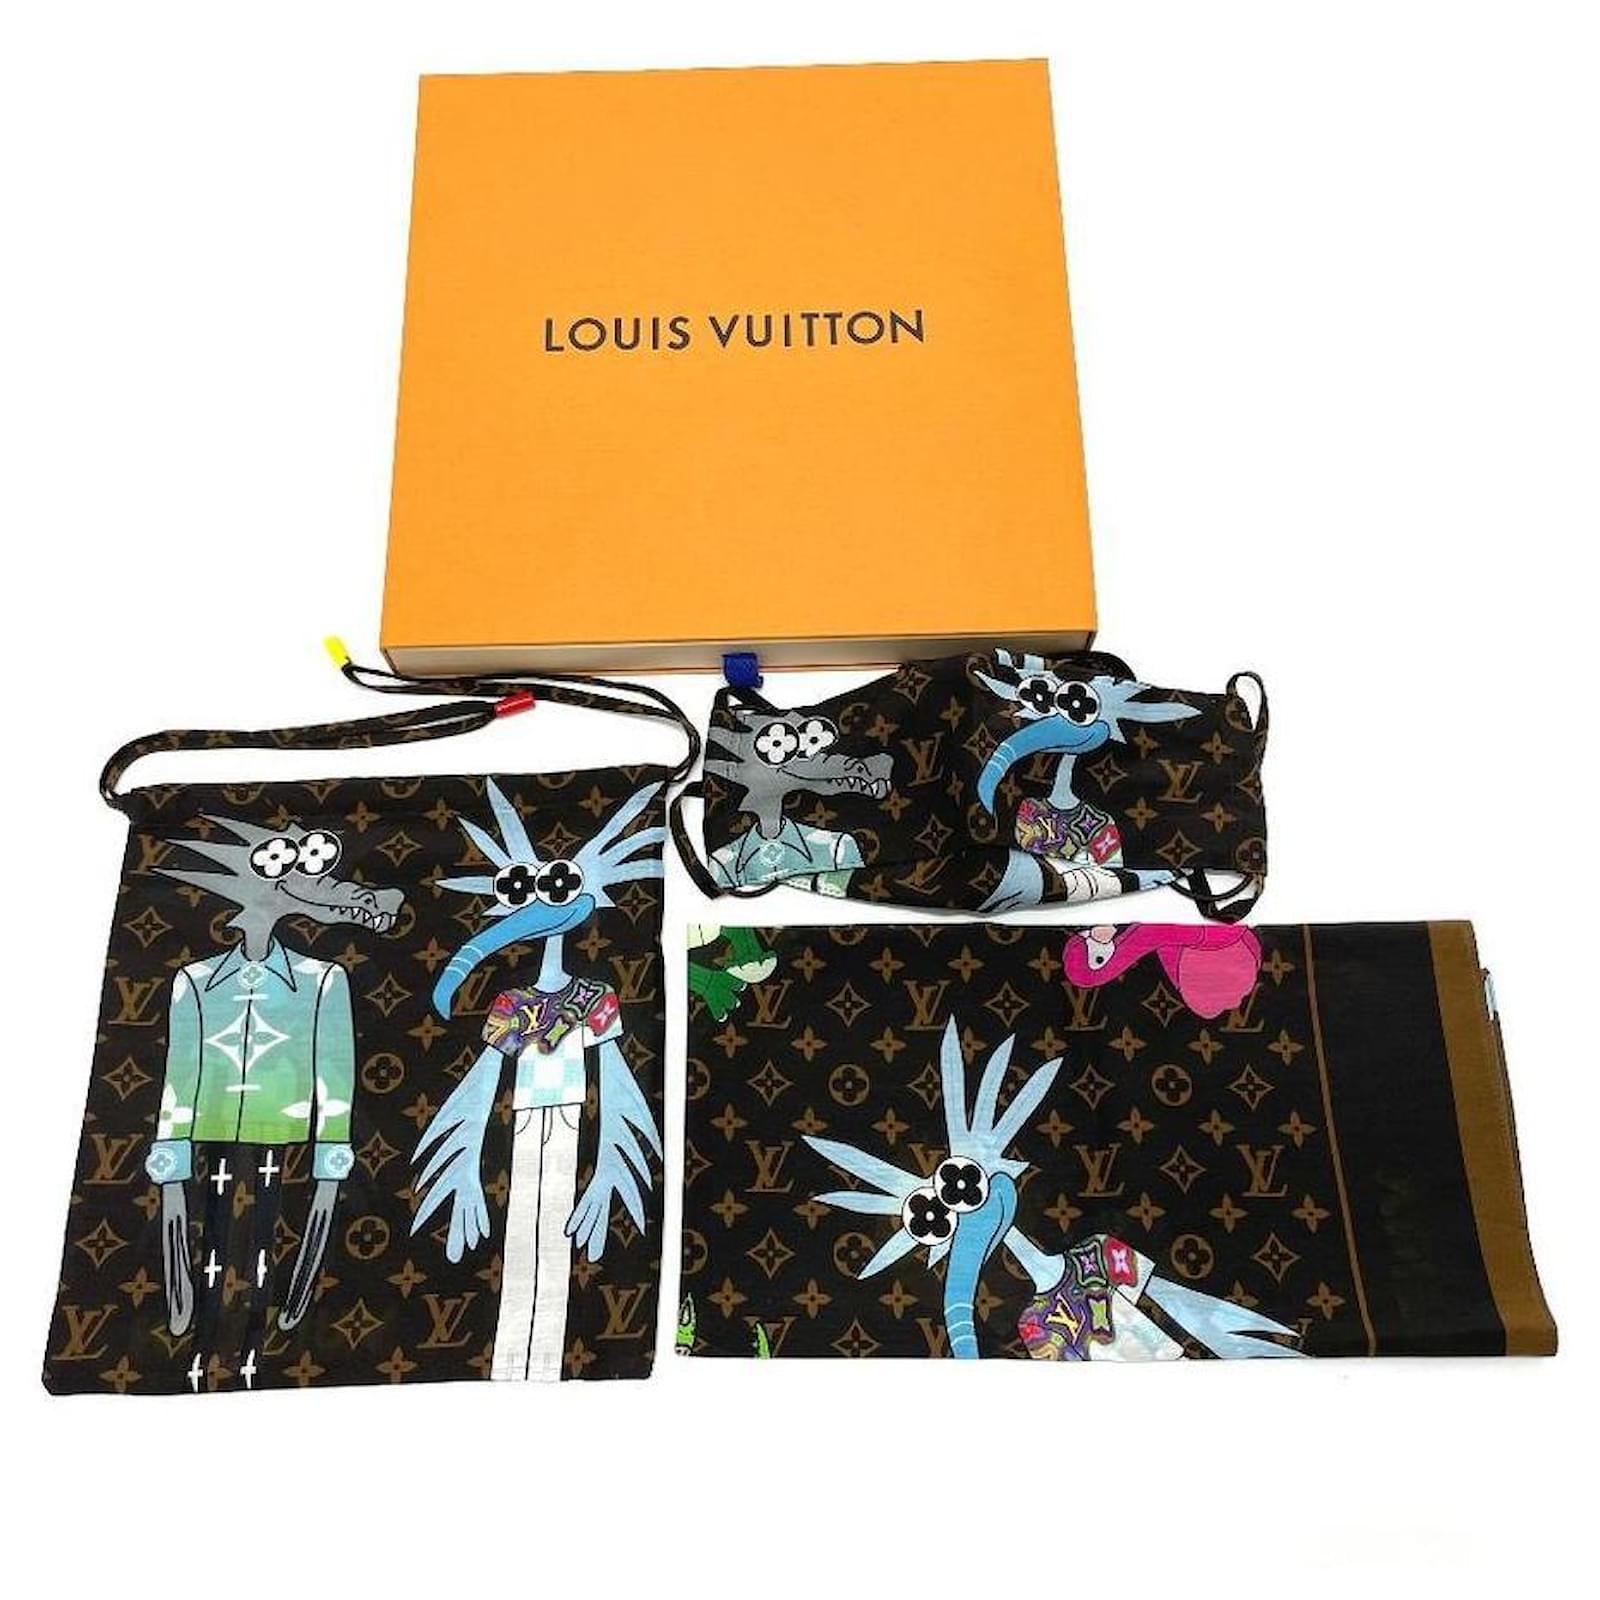 How Japanese culture inspired the new Louis Vuitton x Nigo LV² collection